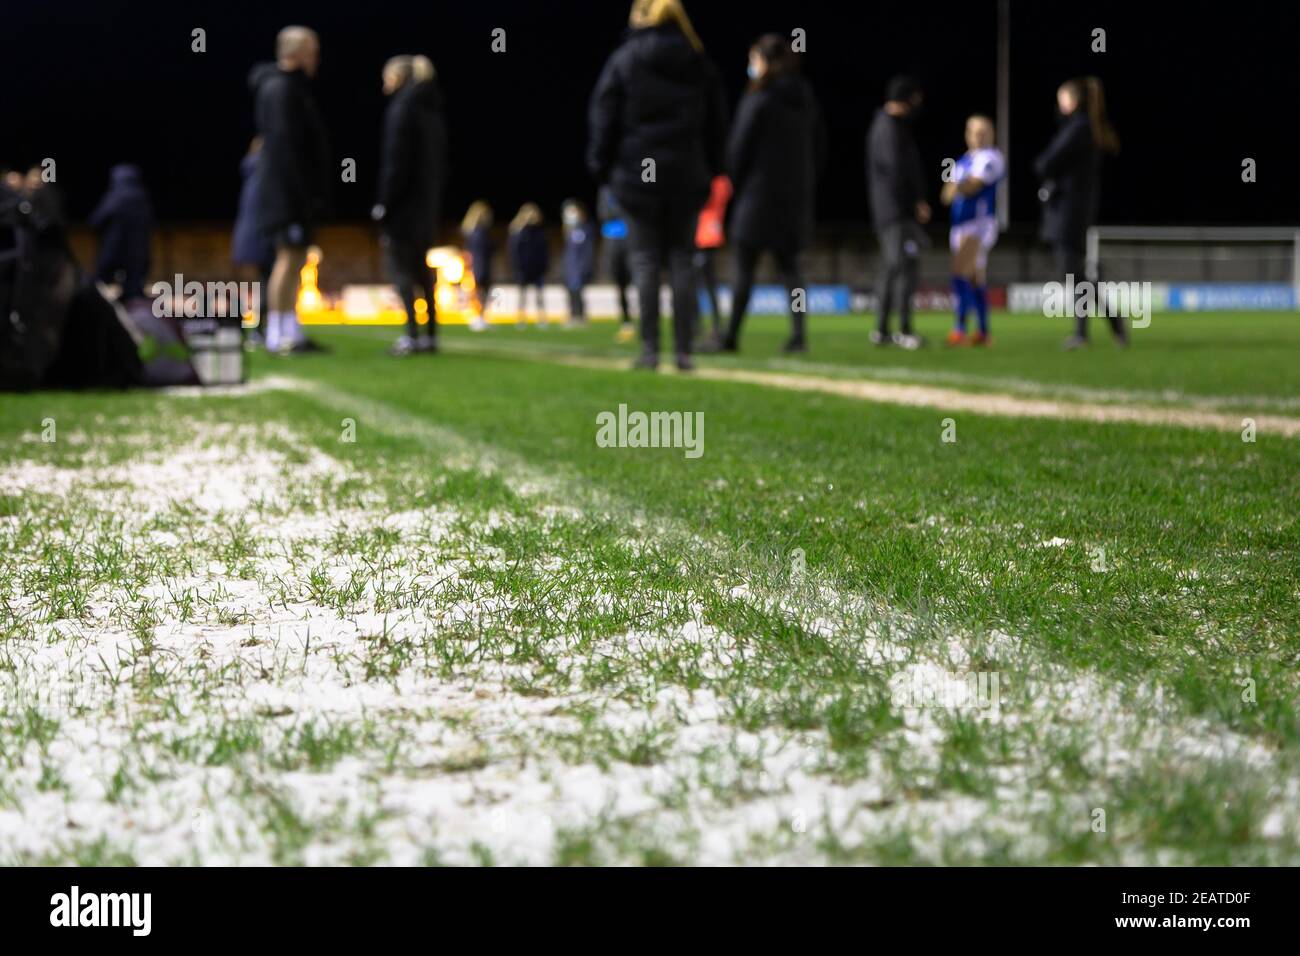 Solihull, West Midlands, 10th February, 2021. Womes Super League match between Birmingham rivals Birmingham City FC and Aston Villa at the Solihull Moors ground in Solihull has been postponed due to a frozen pitch. Credit: Peter Lopeman/Alamy Live News Stock Photo